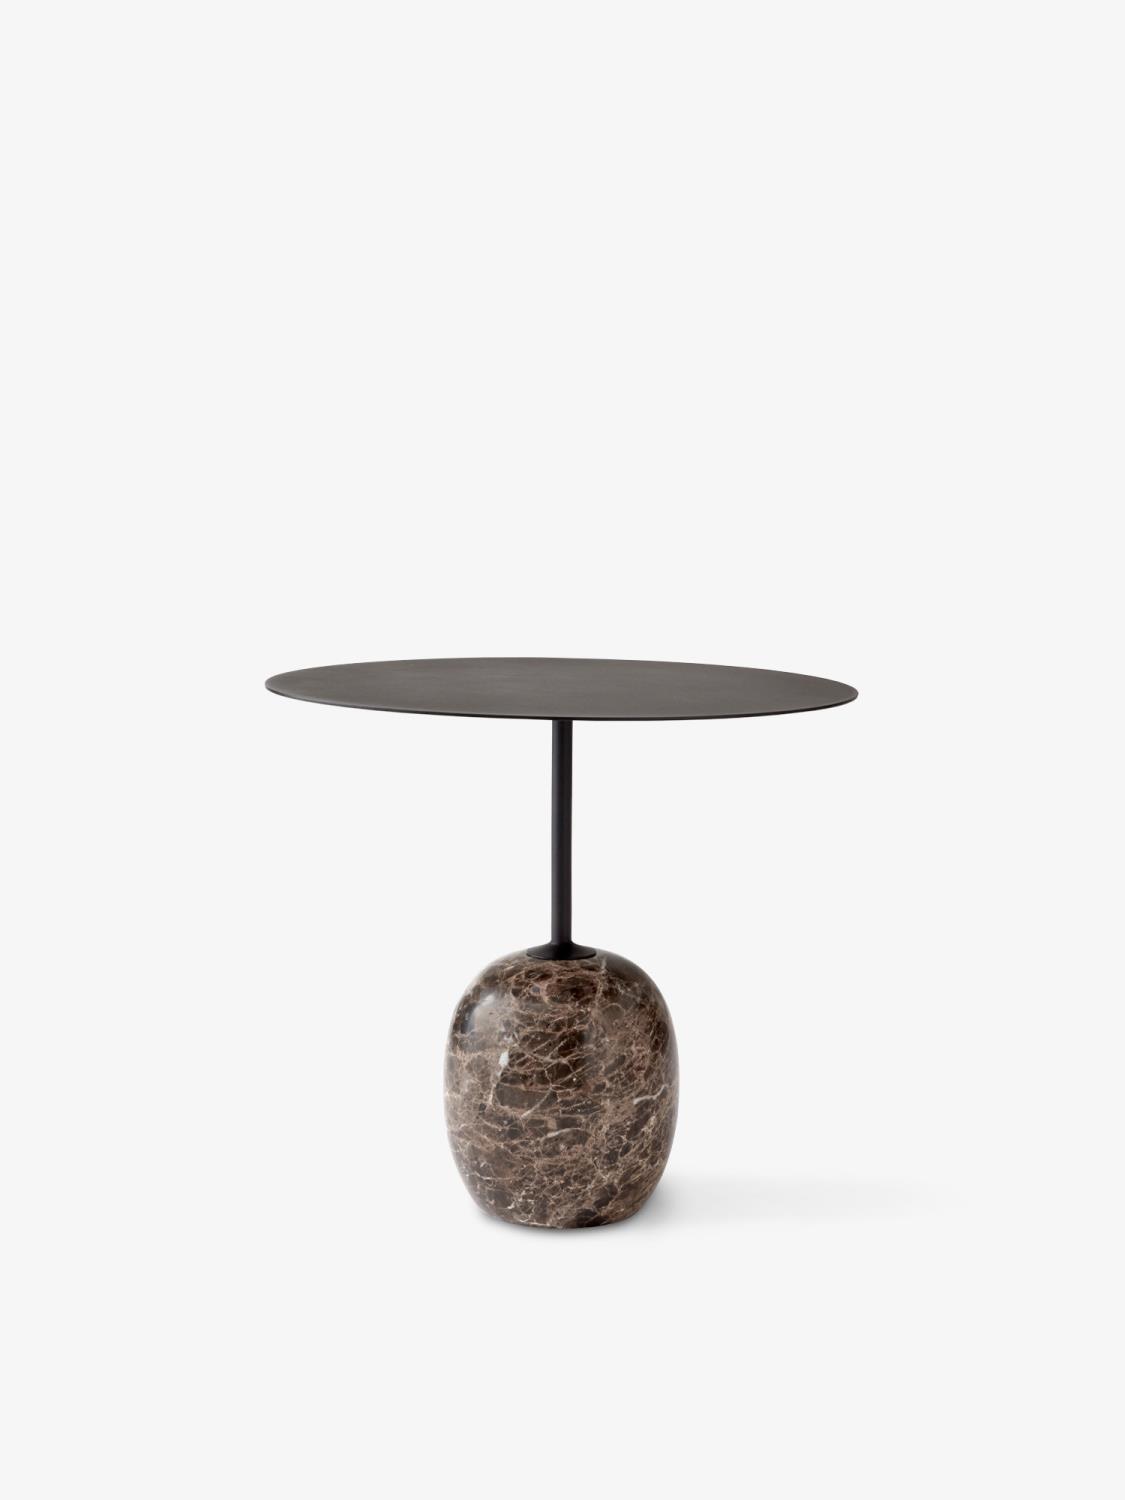 &Tradition - Lato Table LN9 - Oval - Warm Black and Emparador Marble